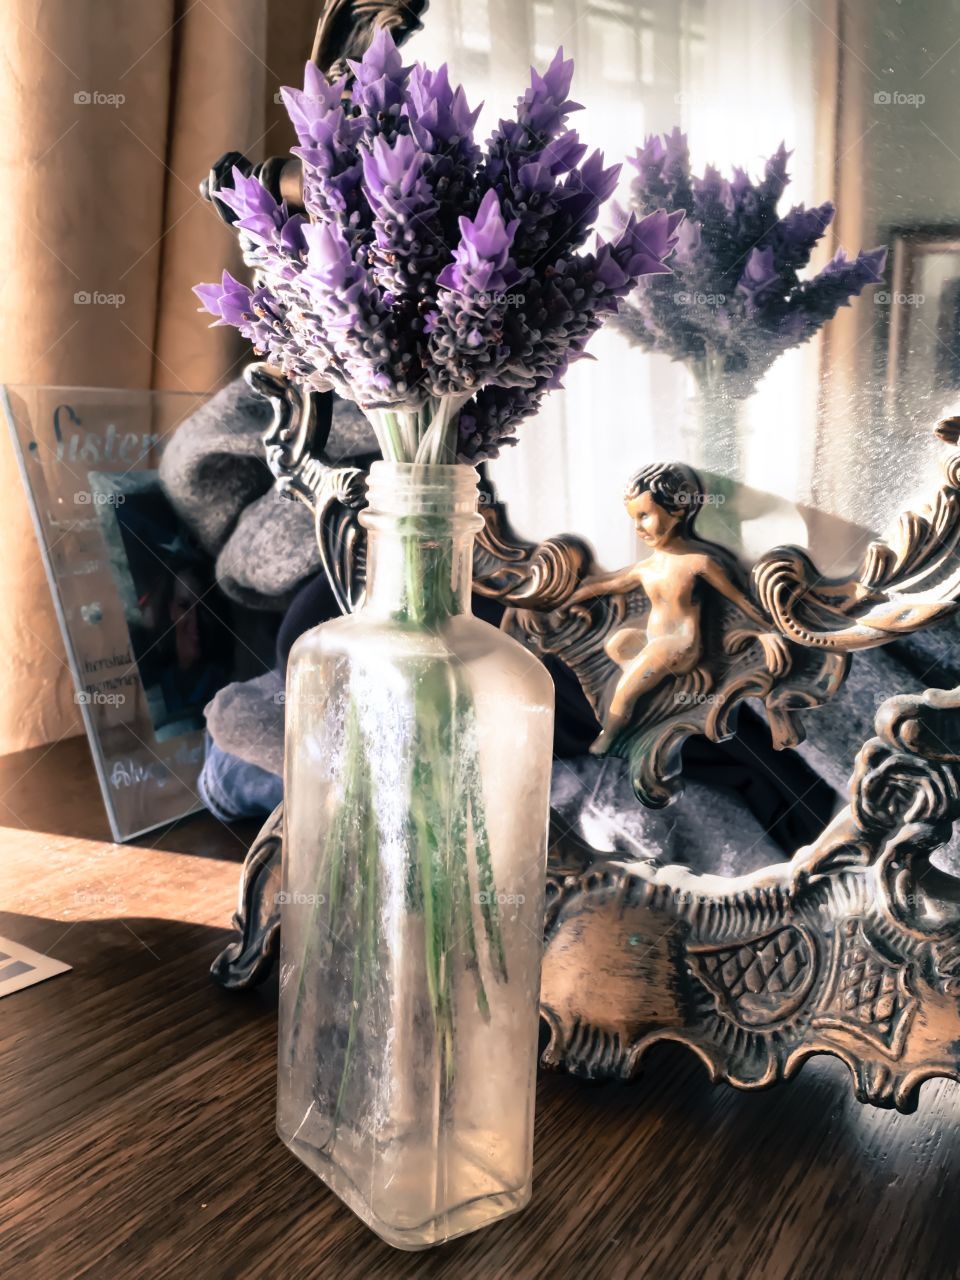 Bouquet posey of lavender in an antique medicine bottle sitting upon an antique wood dresser in front of an antique mirror, flowers reflected in mirror